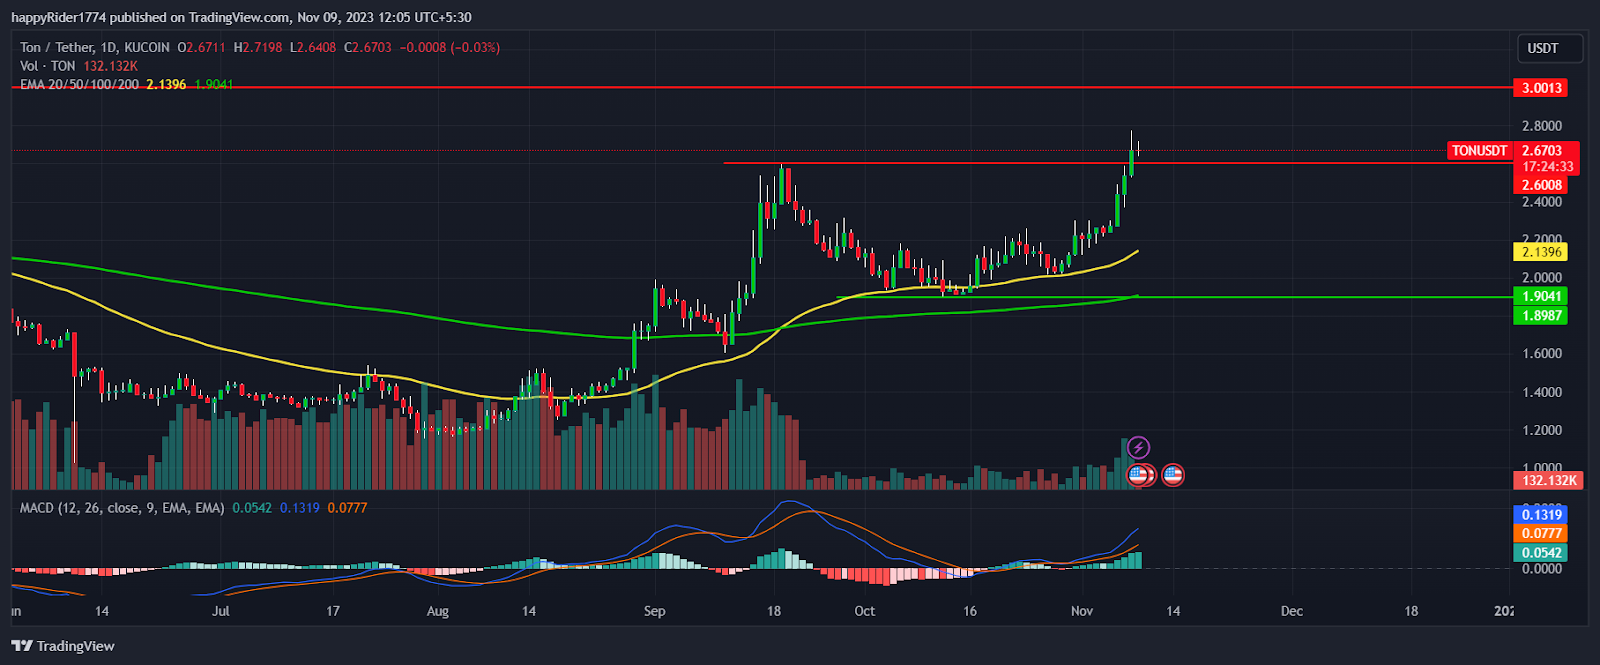 Toncoin Price Prediction: Will TON Price Reach $3 By December?